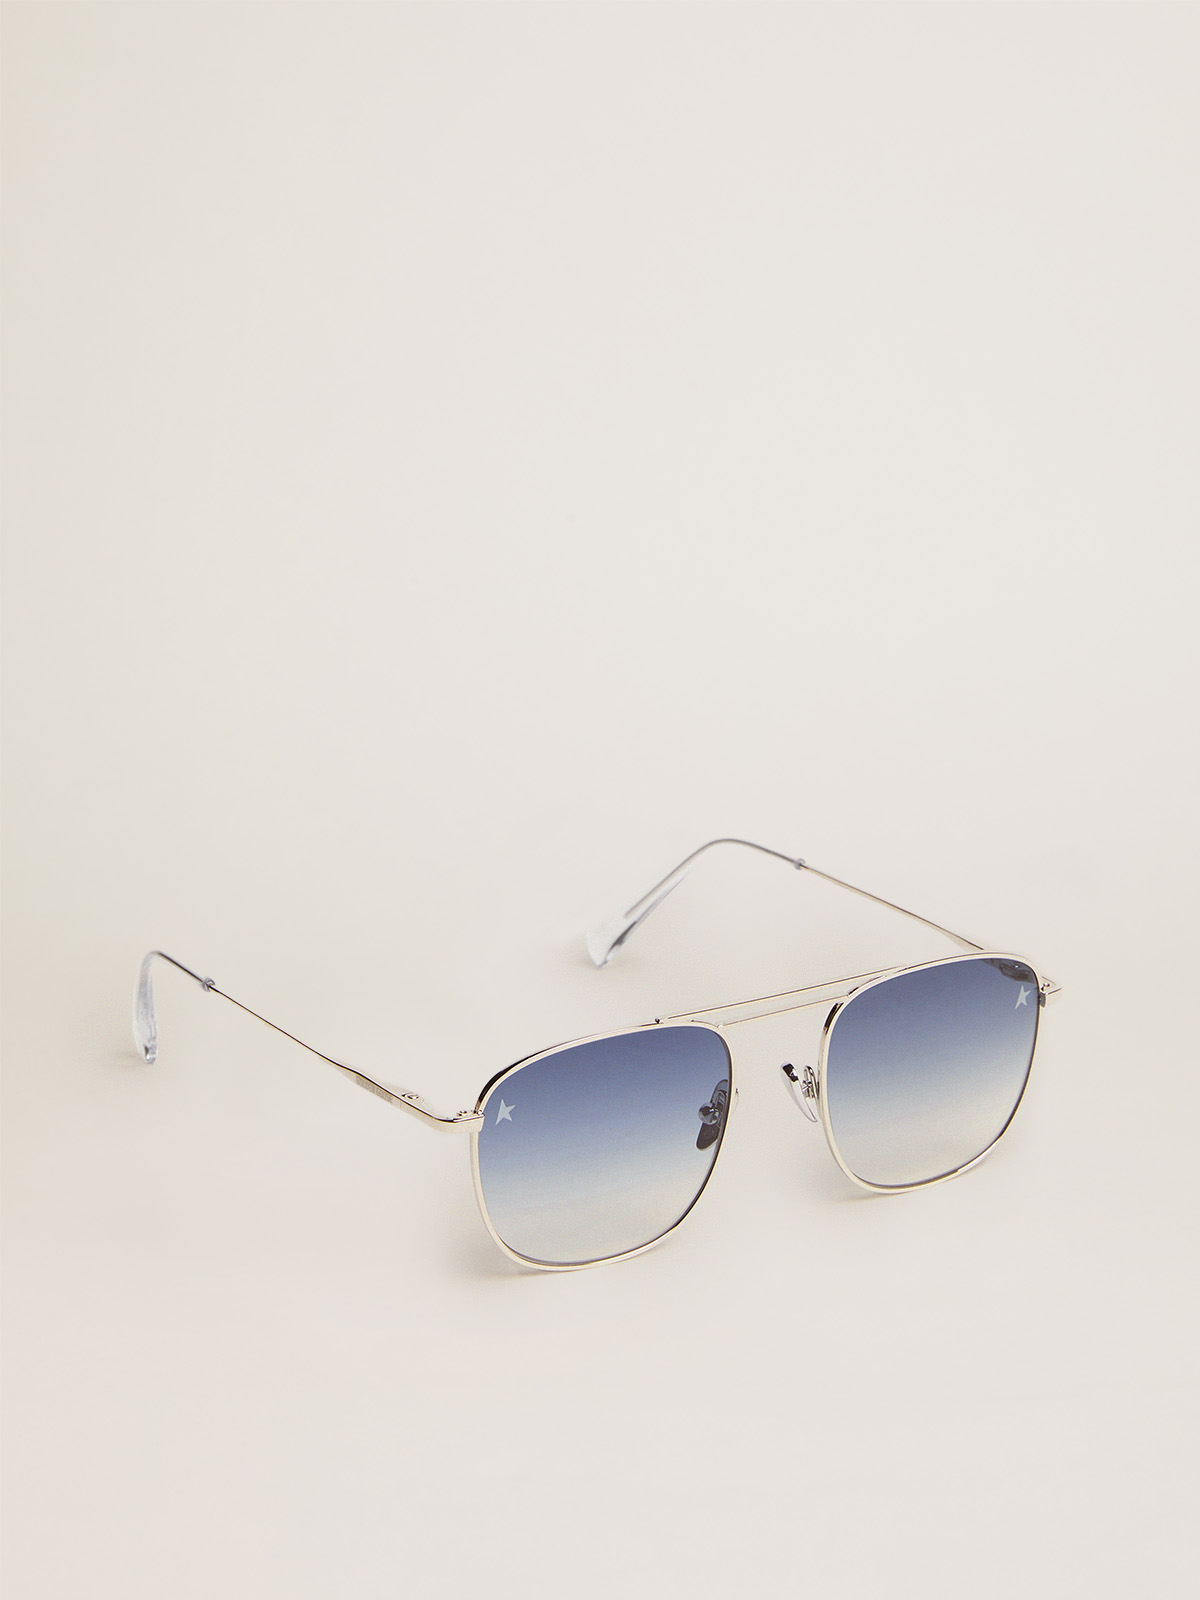 Louis Vuitton Mens Sunglasses, Blue, W (Stock Confirmation Required)